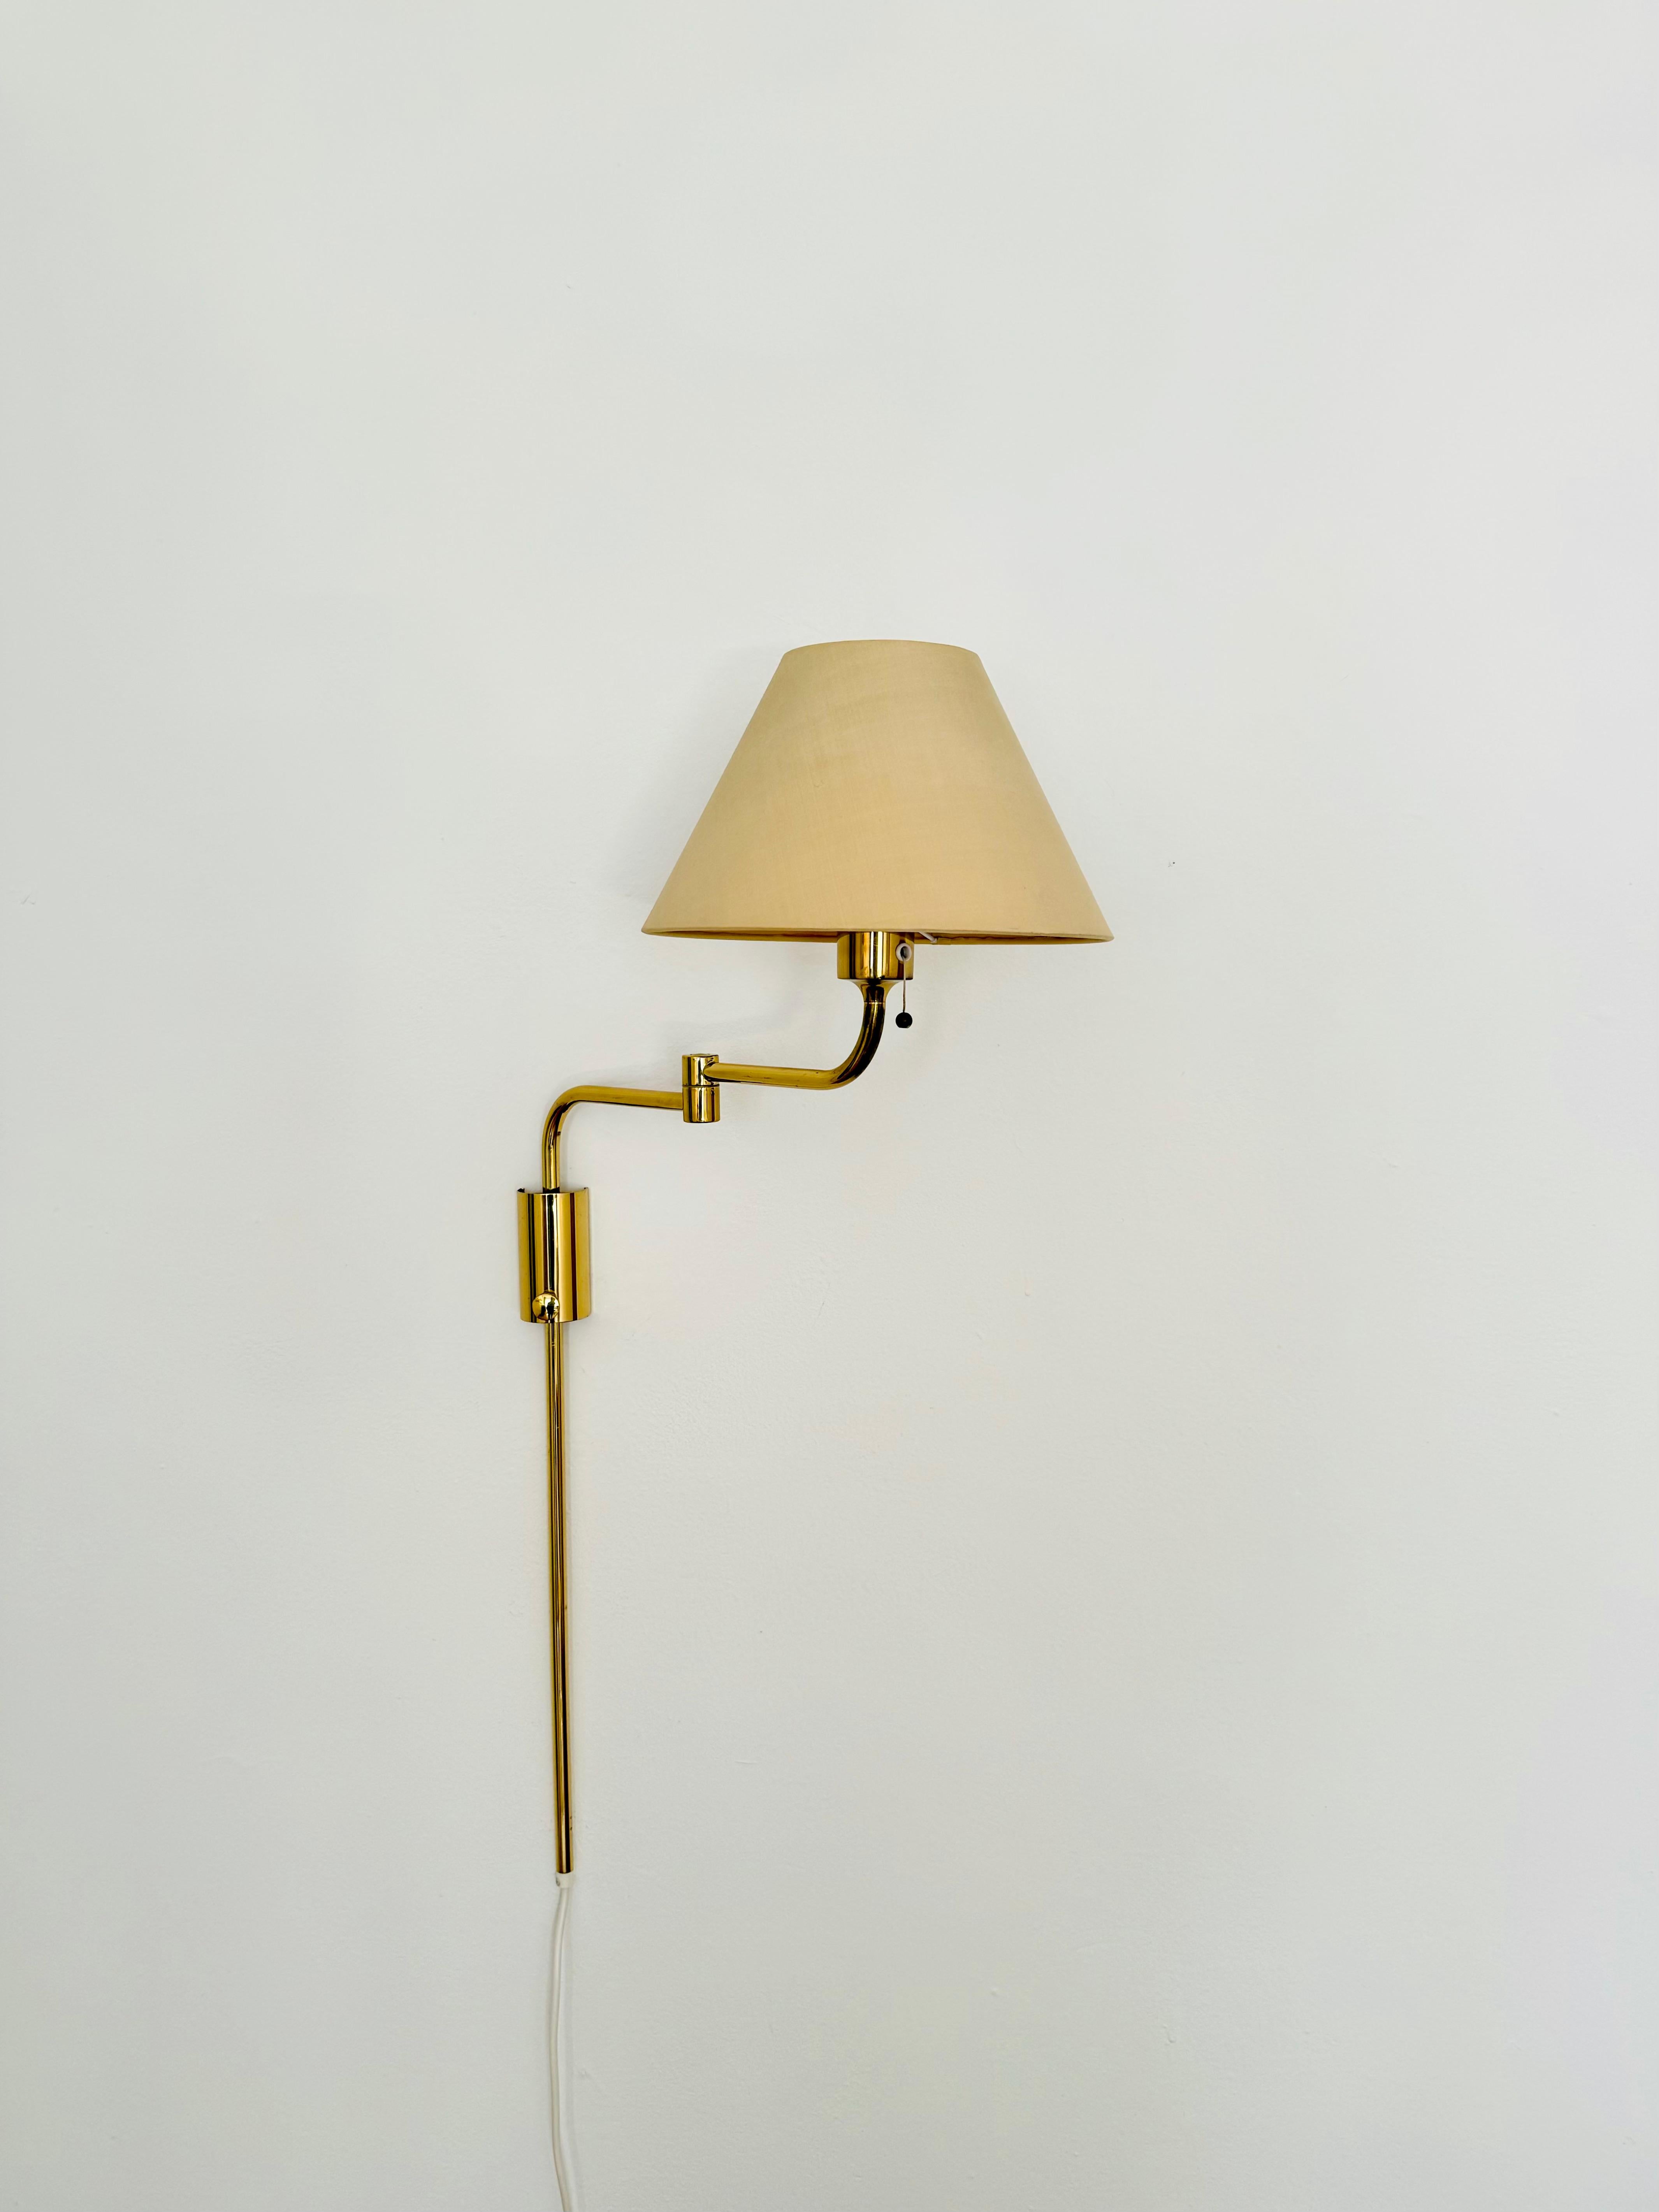 German Adjustable Brass Lesan Wall Lamp by Florian Schulz For Sale